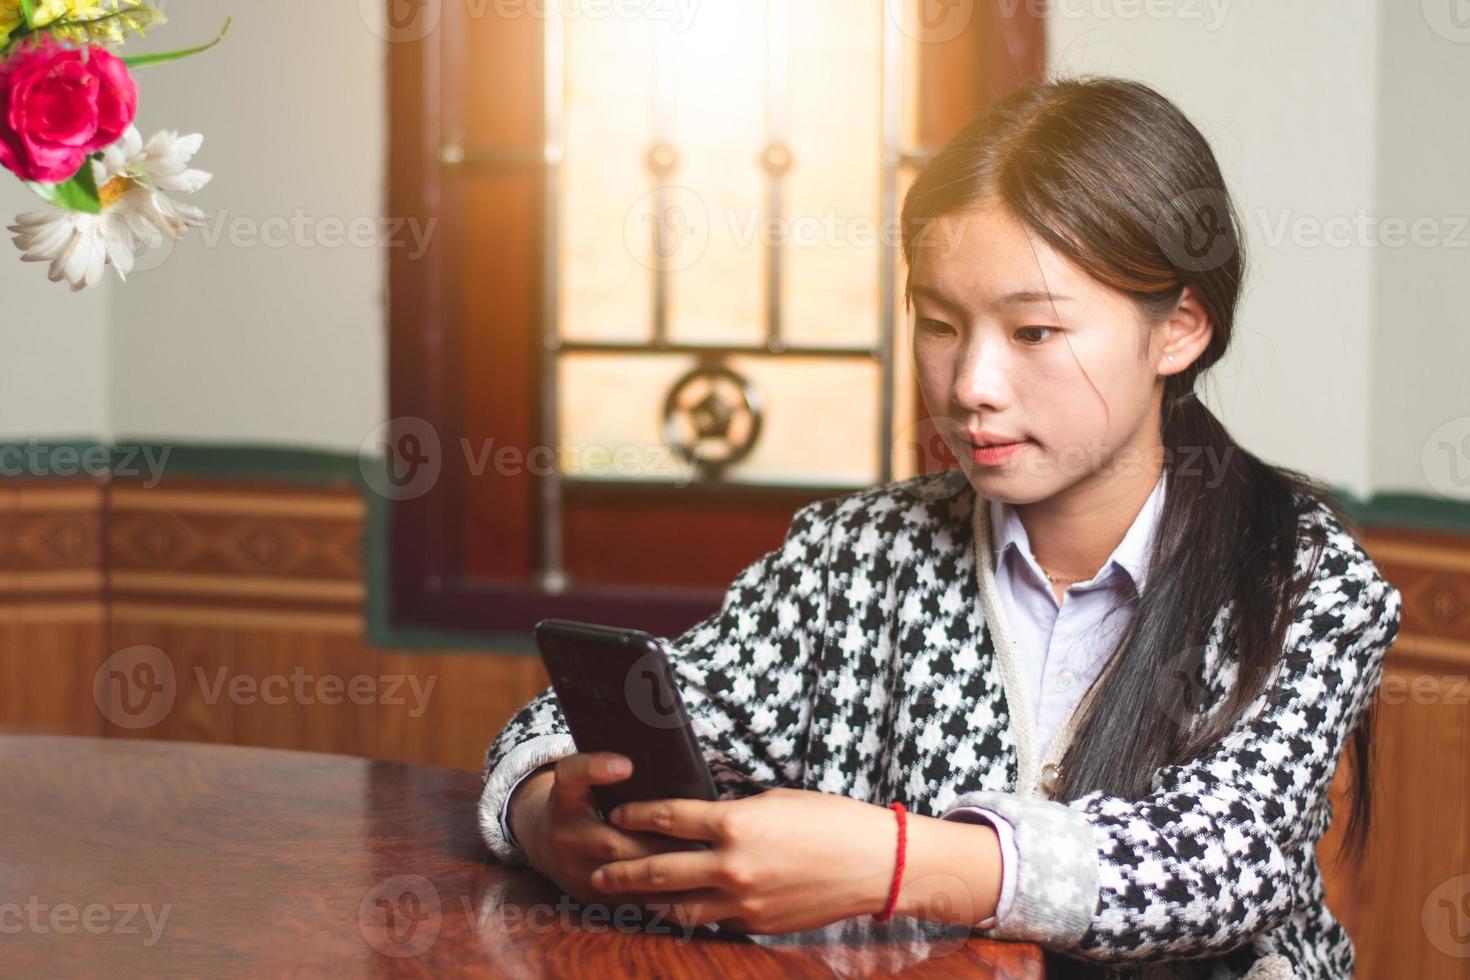 A young student online chat with her friend on mobile phone, social media and chatting connection concept, sun light through the windows copy space for individual text photo